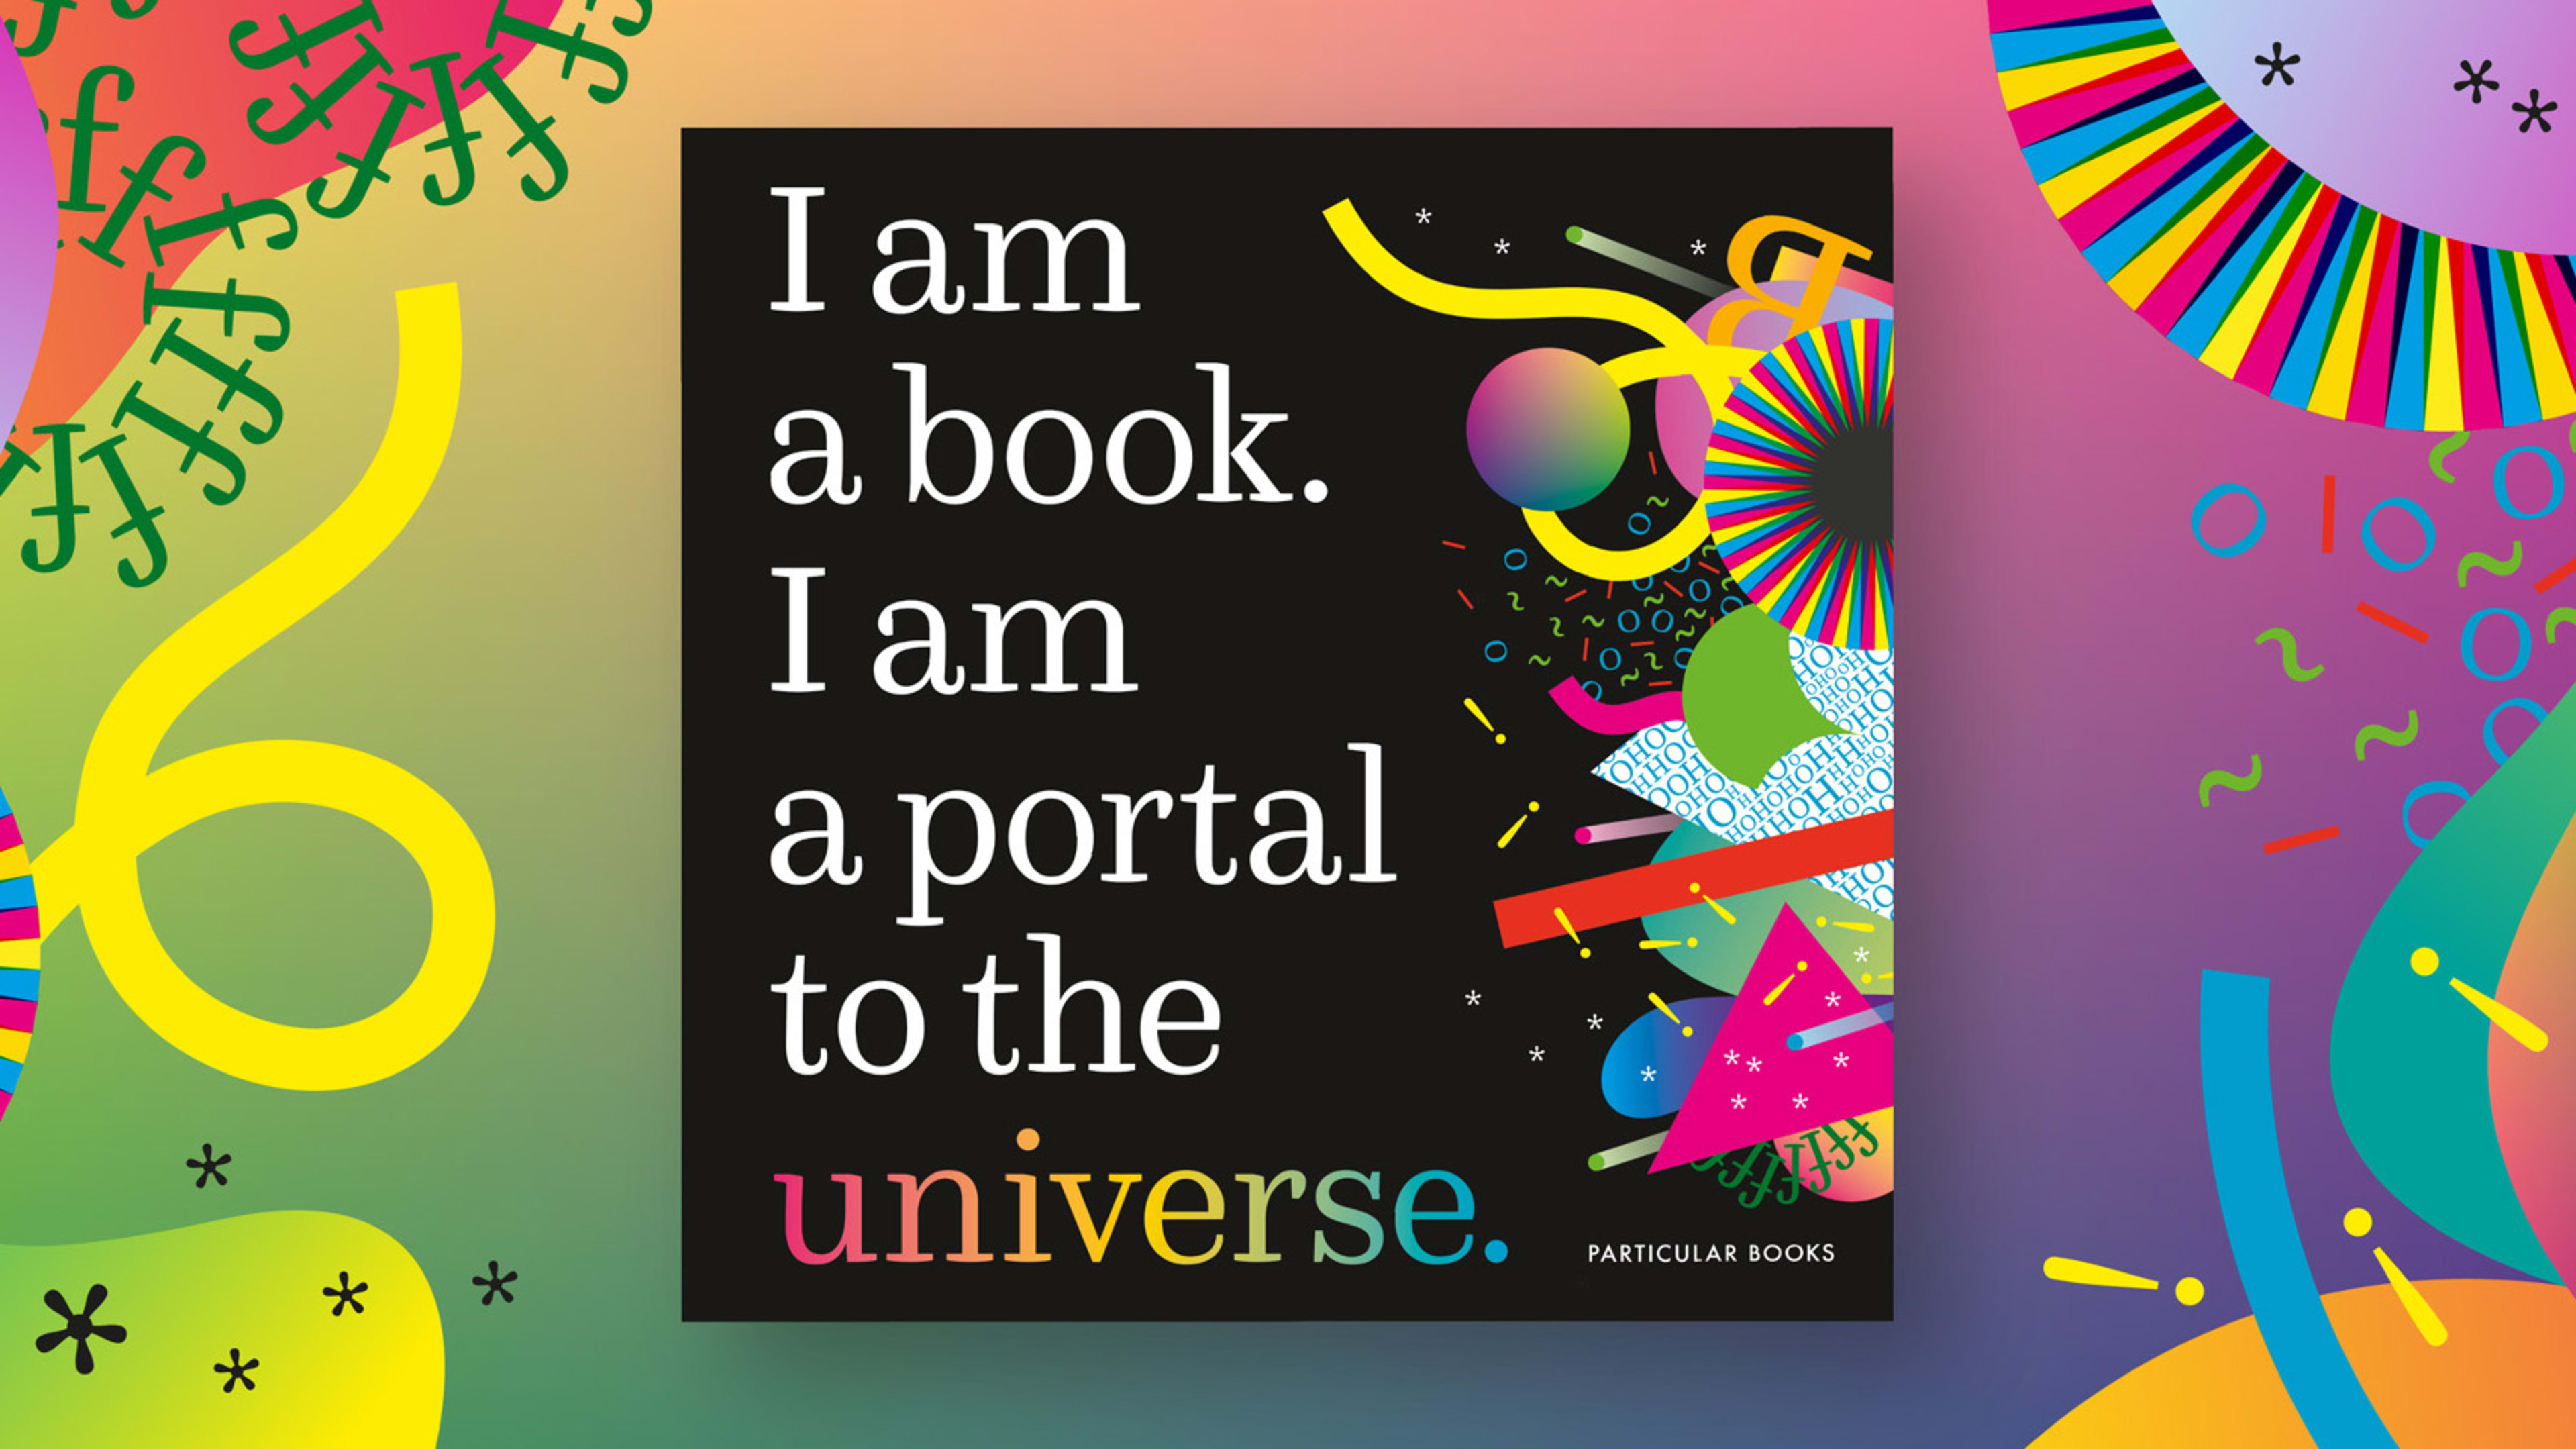 This clever children’s book uses interactive data visualizations to explain the universe